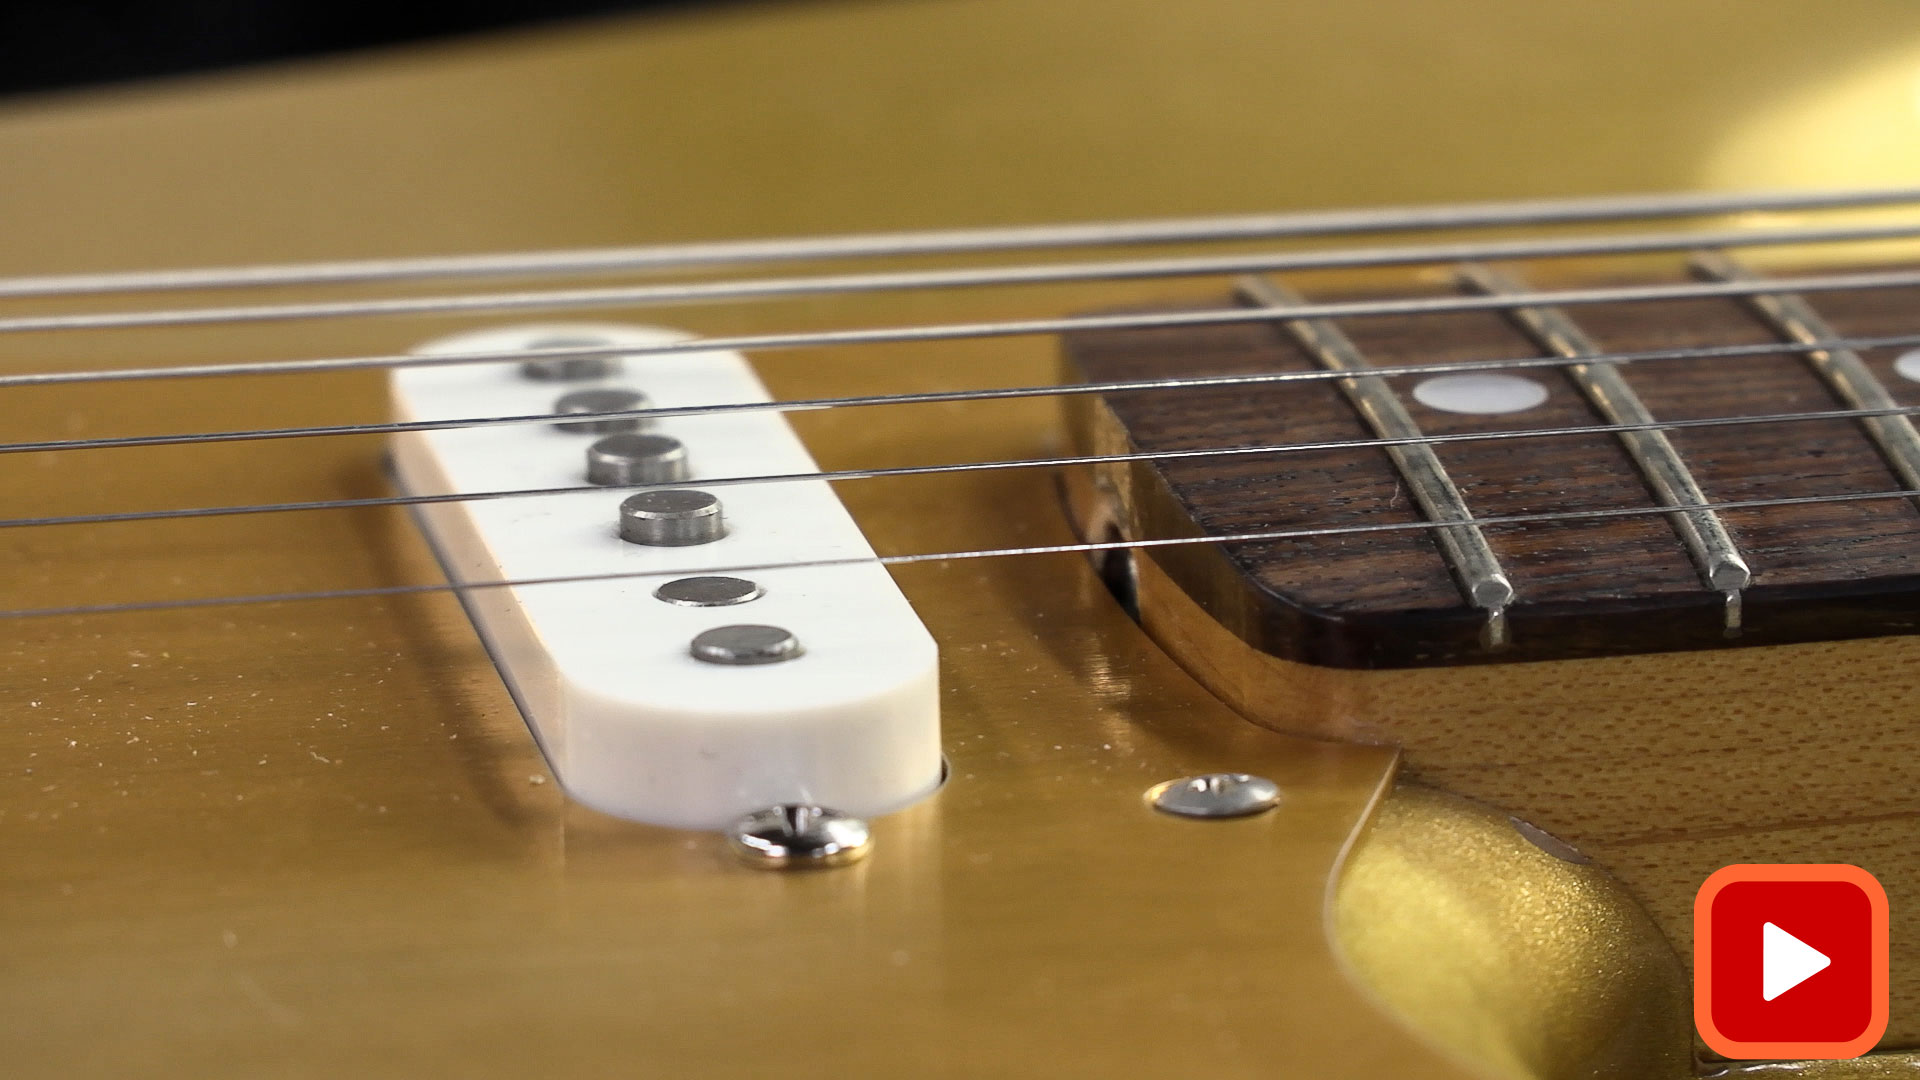 https://www.stewmac.com/globalassets/video-and-ideas/trade-secrets/how-to-set-the-height-of-your-guitar-pickups-for-optimal-tone/ts0324-button.jpg?hash=637613120120000000